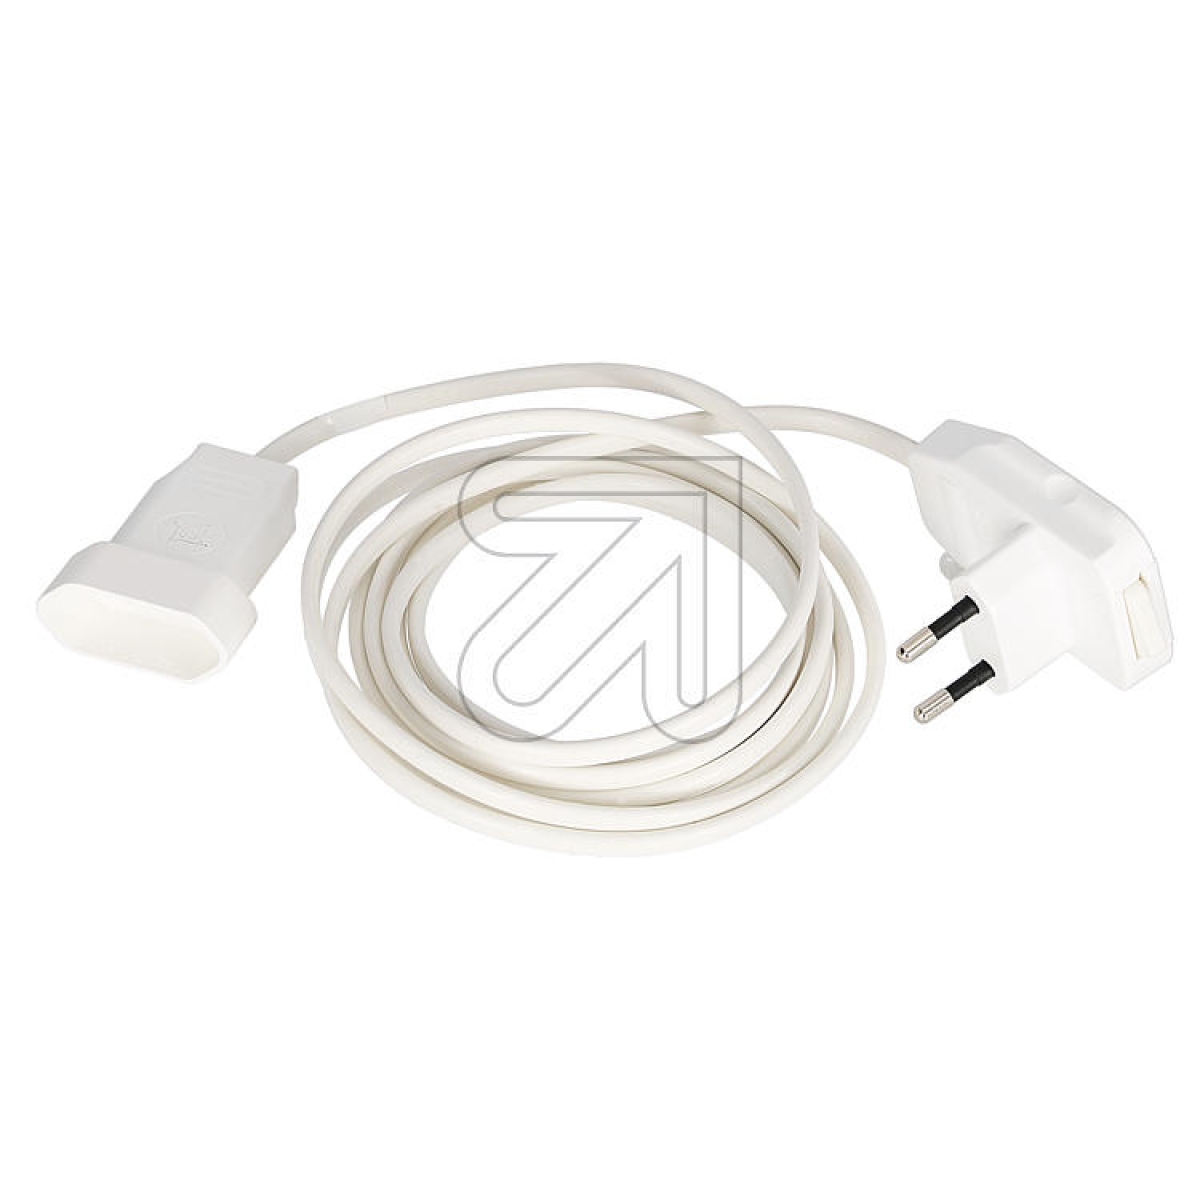 GB GebroEurope extension with switch 3m whiteArticle-No: 041315